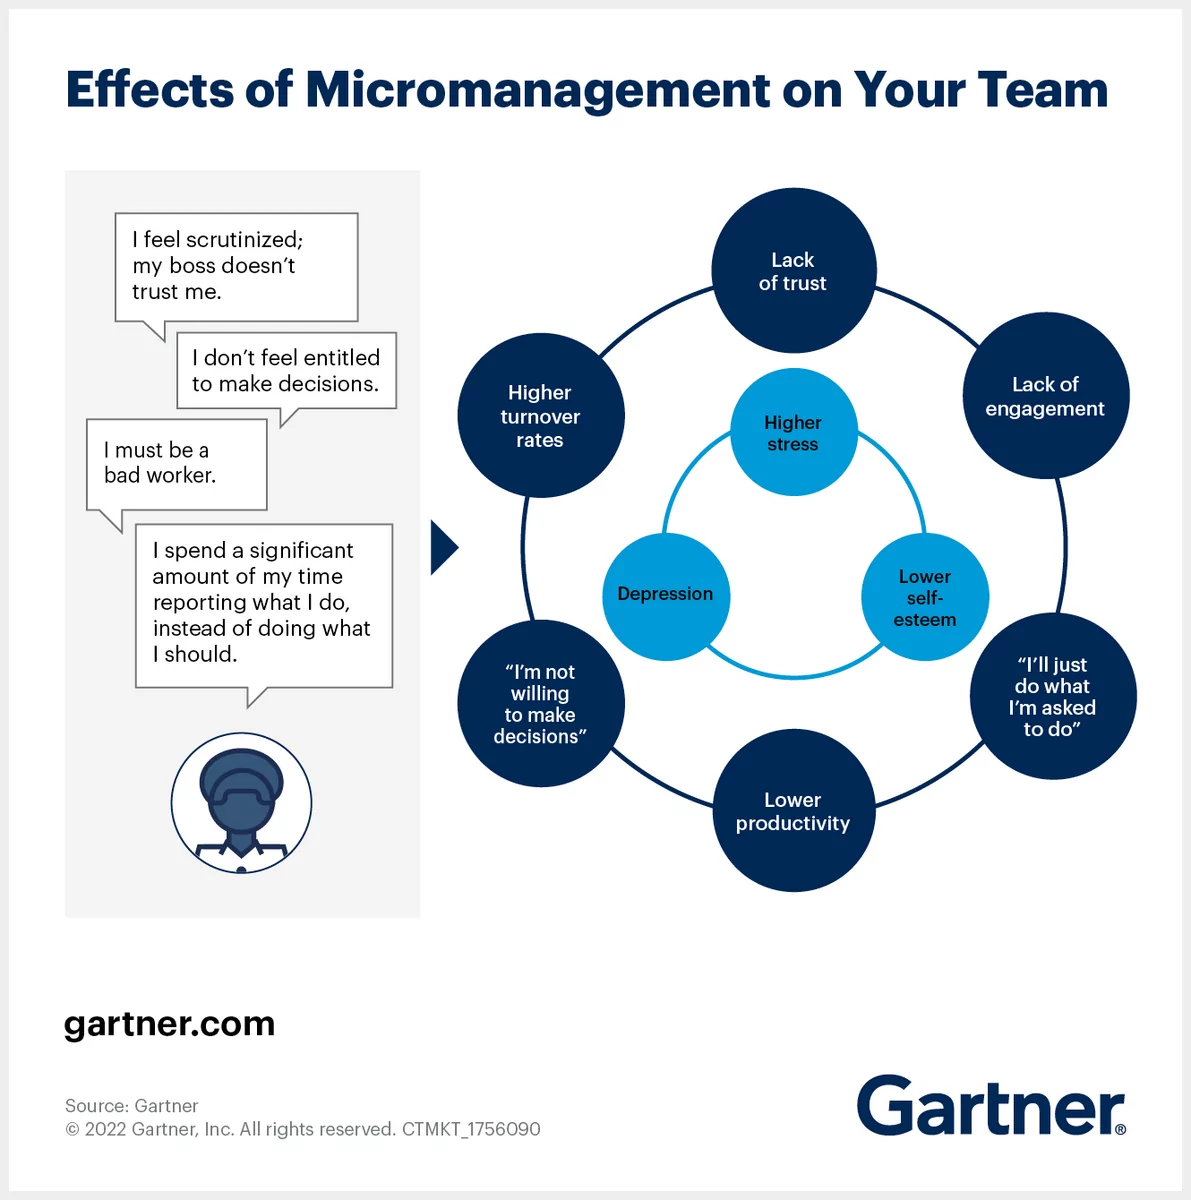 Effects of Micromanagement on Your Team